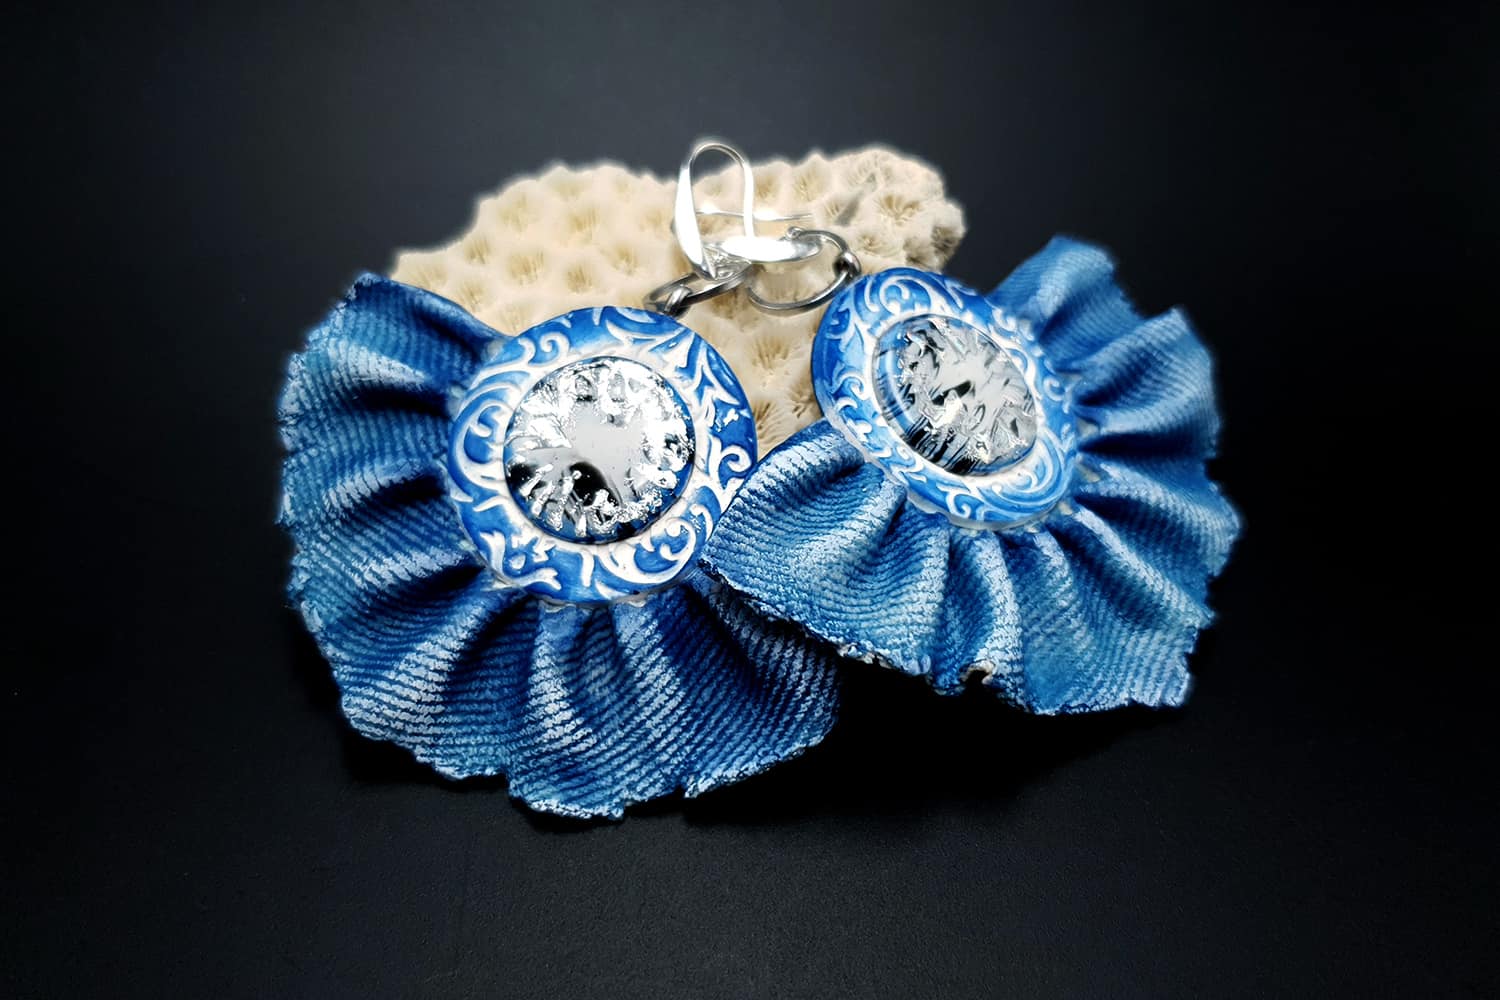 Jewelry from "Faux Jeans/Denim Fabric" course for your inspiration #15